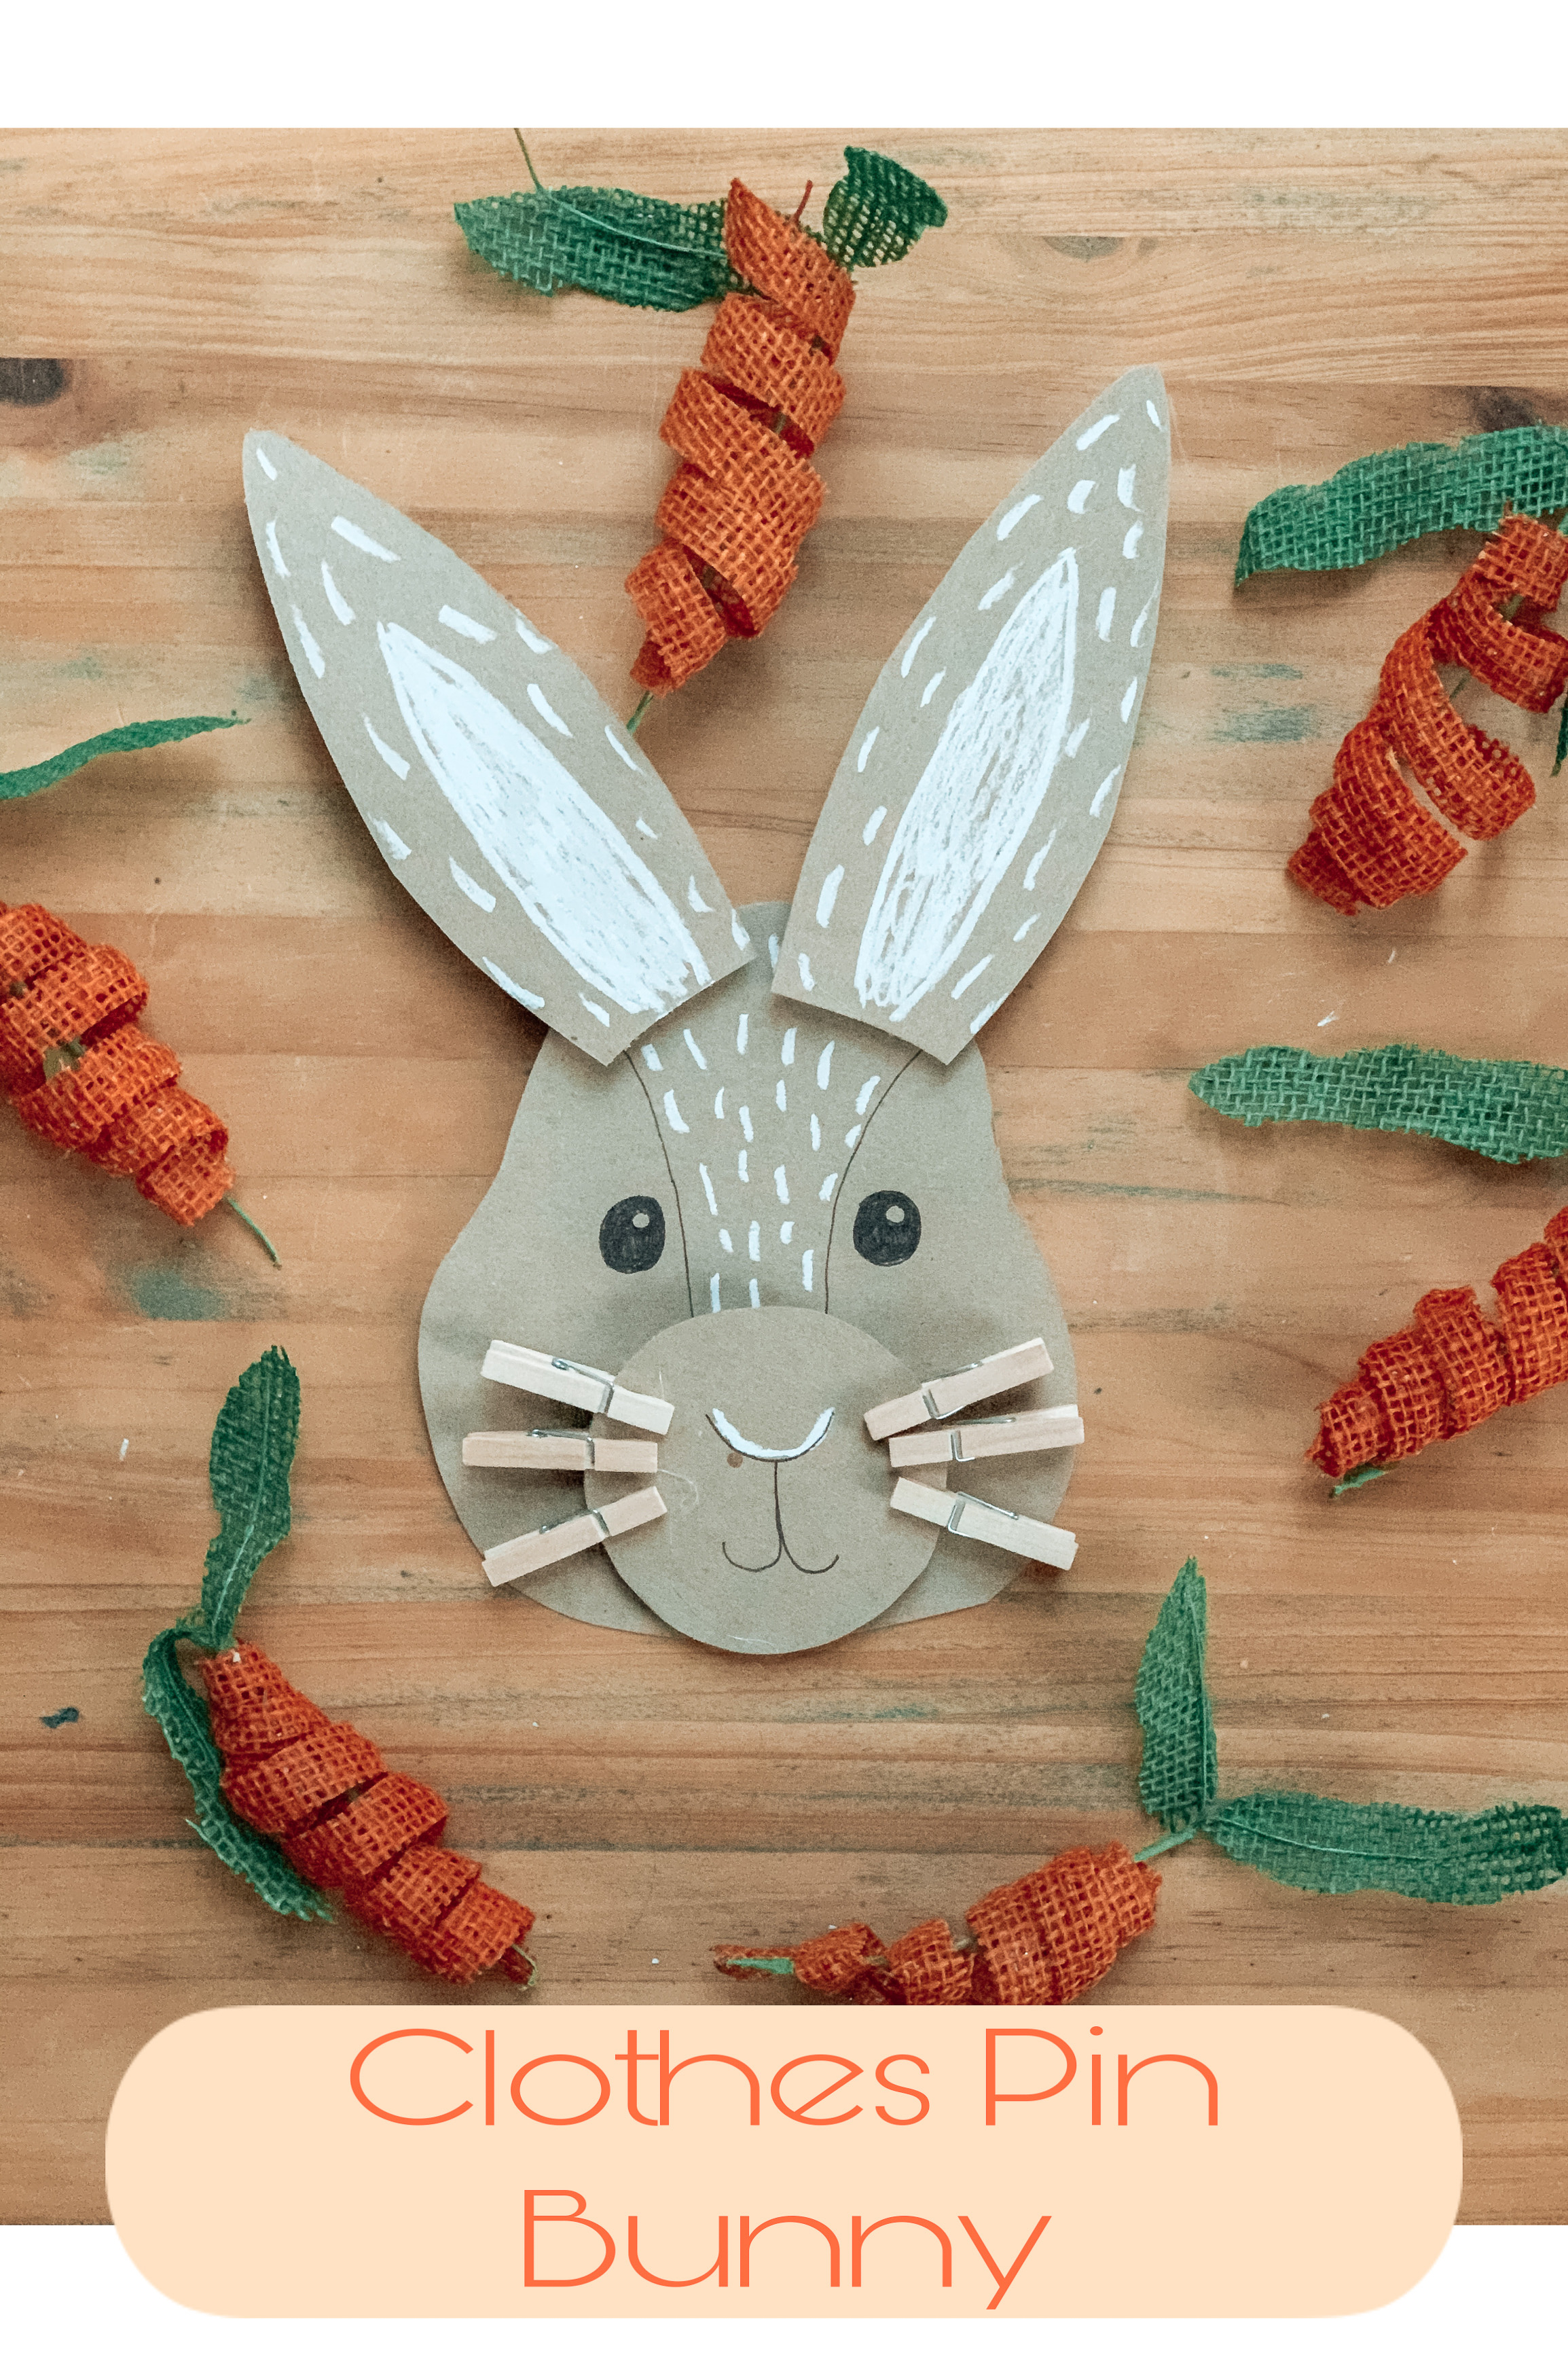 Kids bunny activity craft made from repurposed cardboard and clothespins